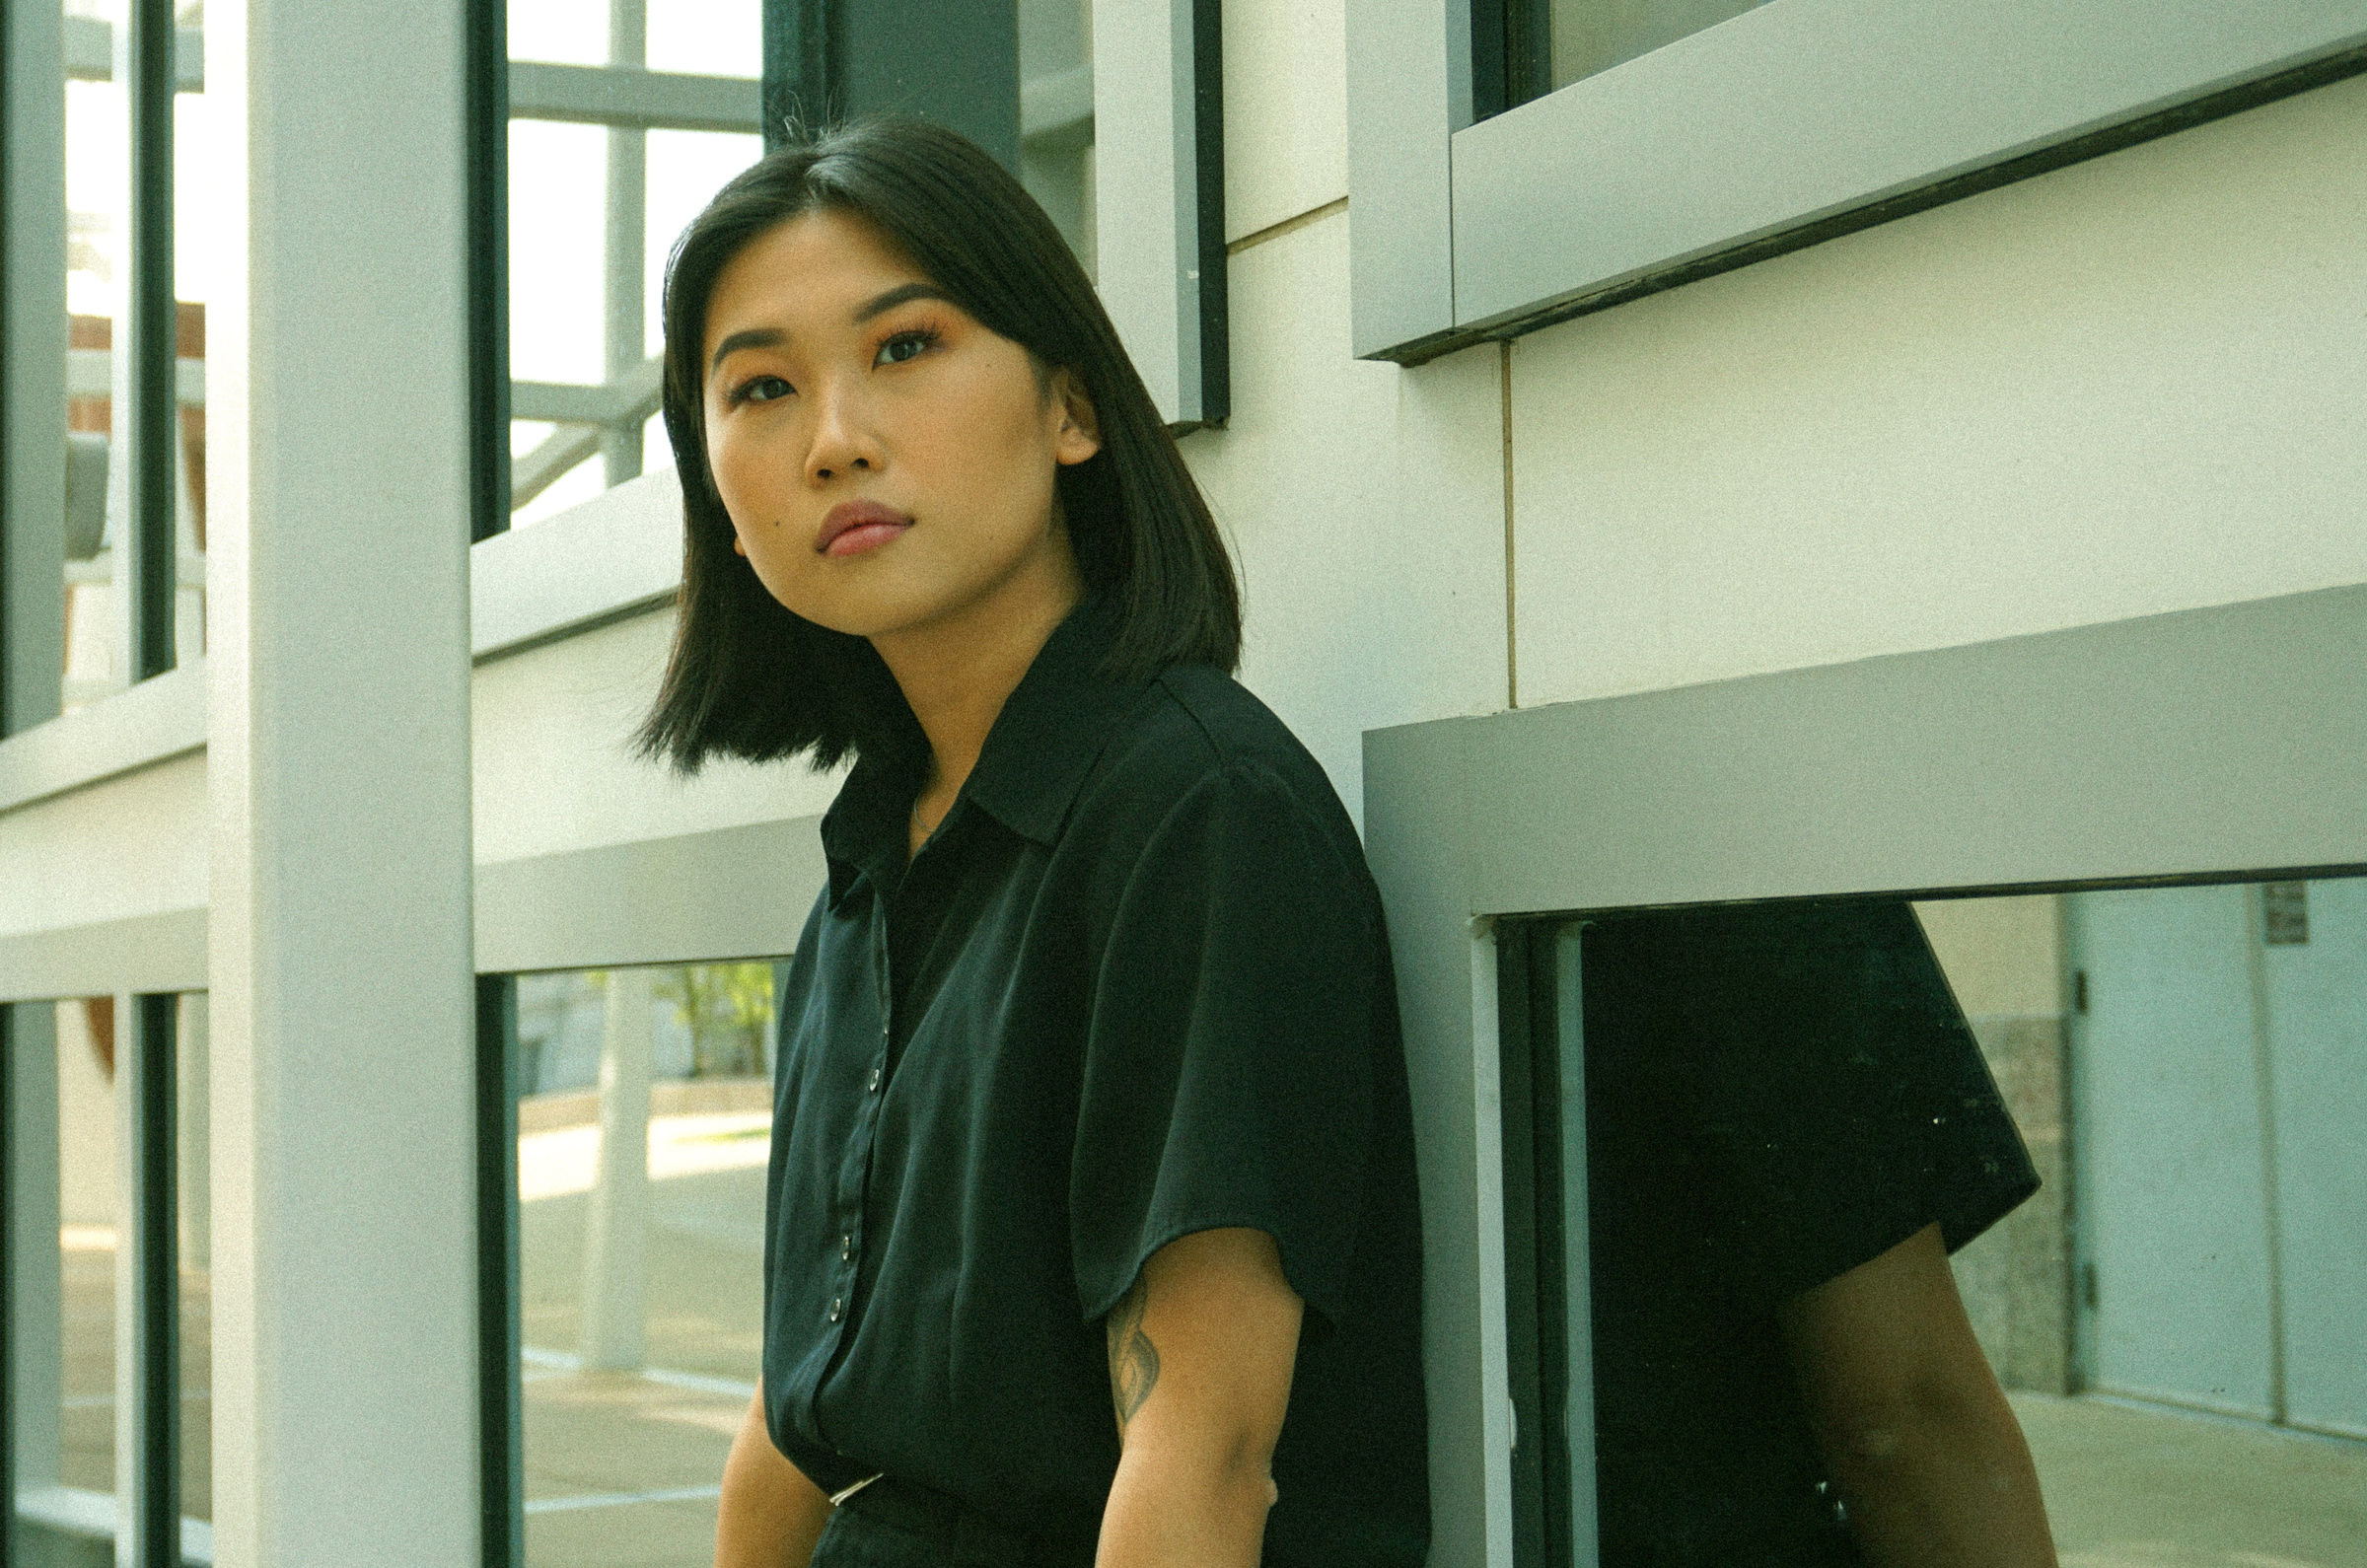 A portrait photo of Lily Li, design intern at the Wexner Center for the Arts, leaning against the side of the glass and metal grid exterior of the building